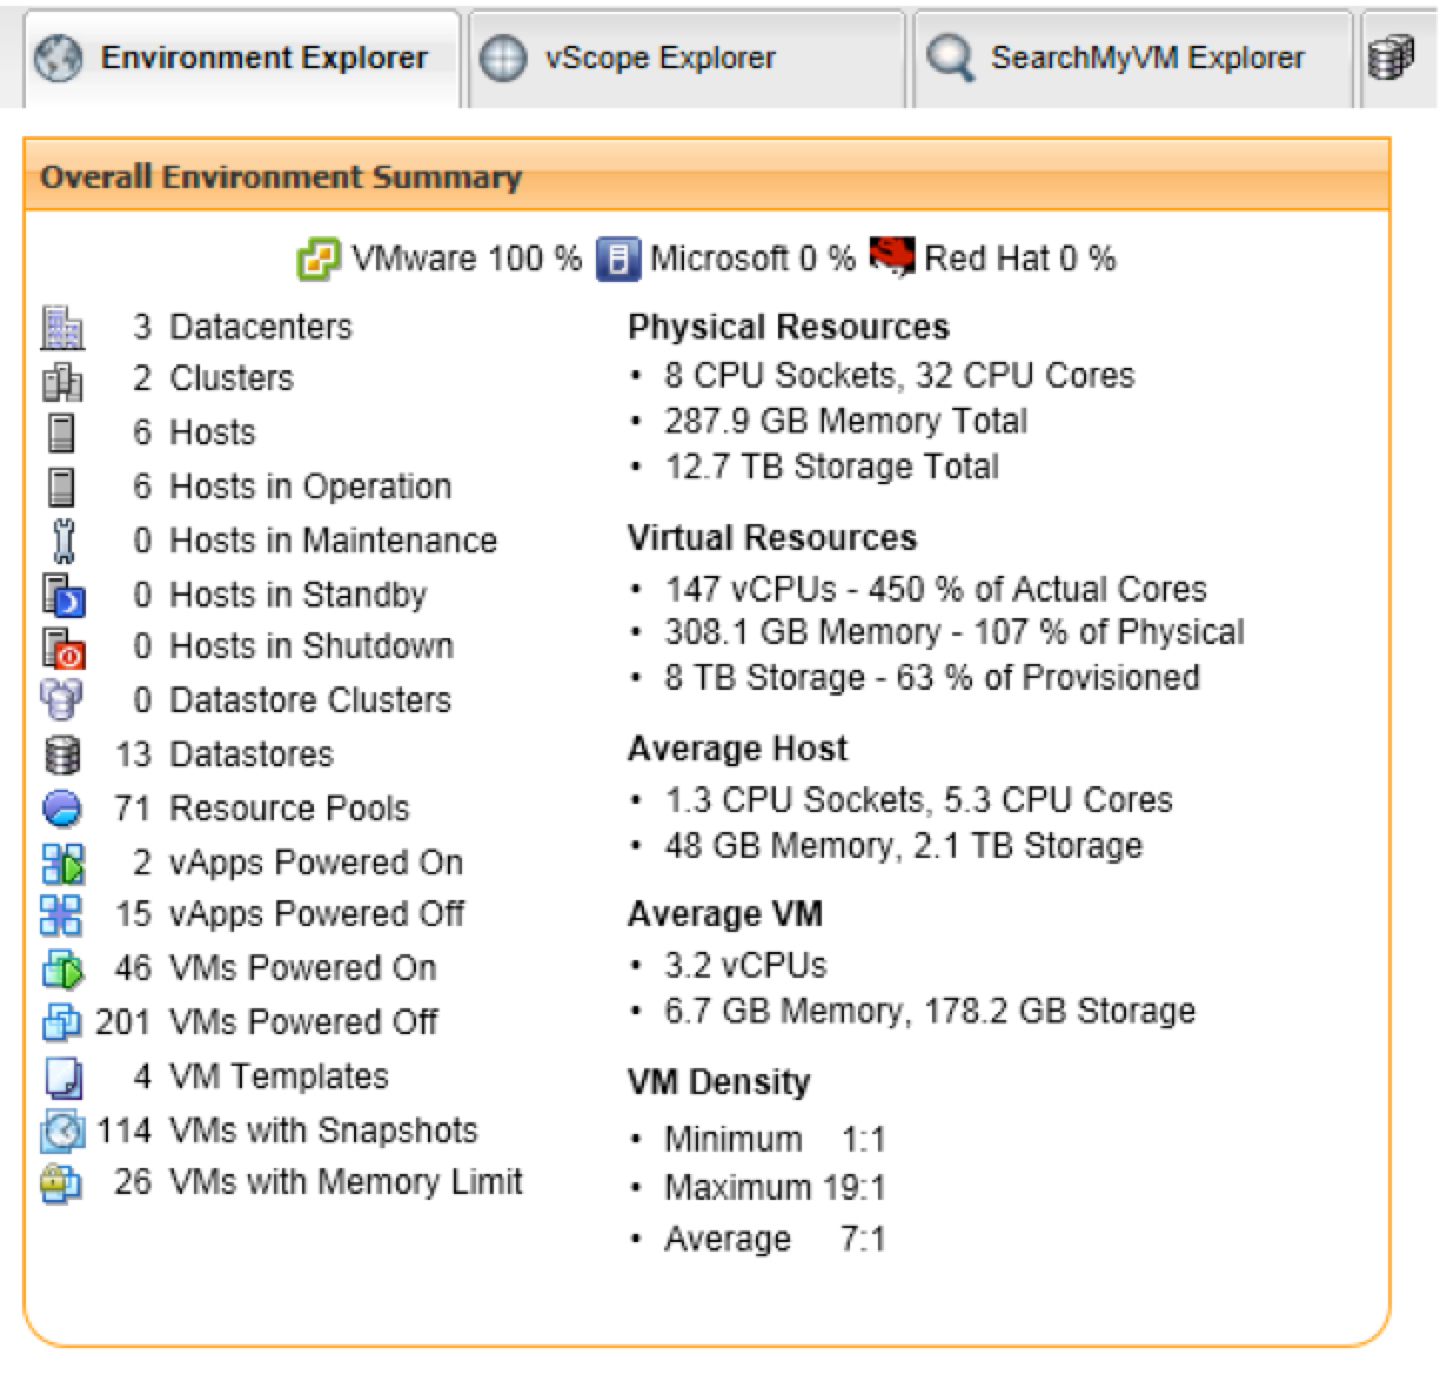 Environment Explorer provides quick report on your virtual infrastructure's general health.